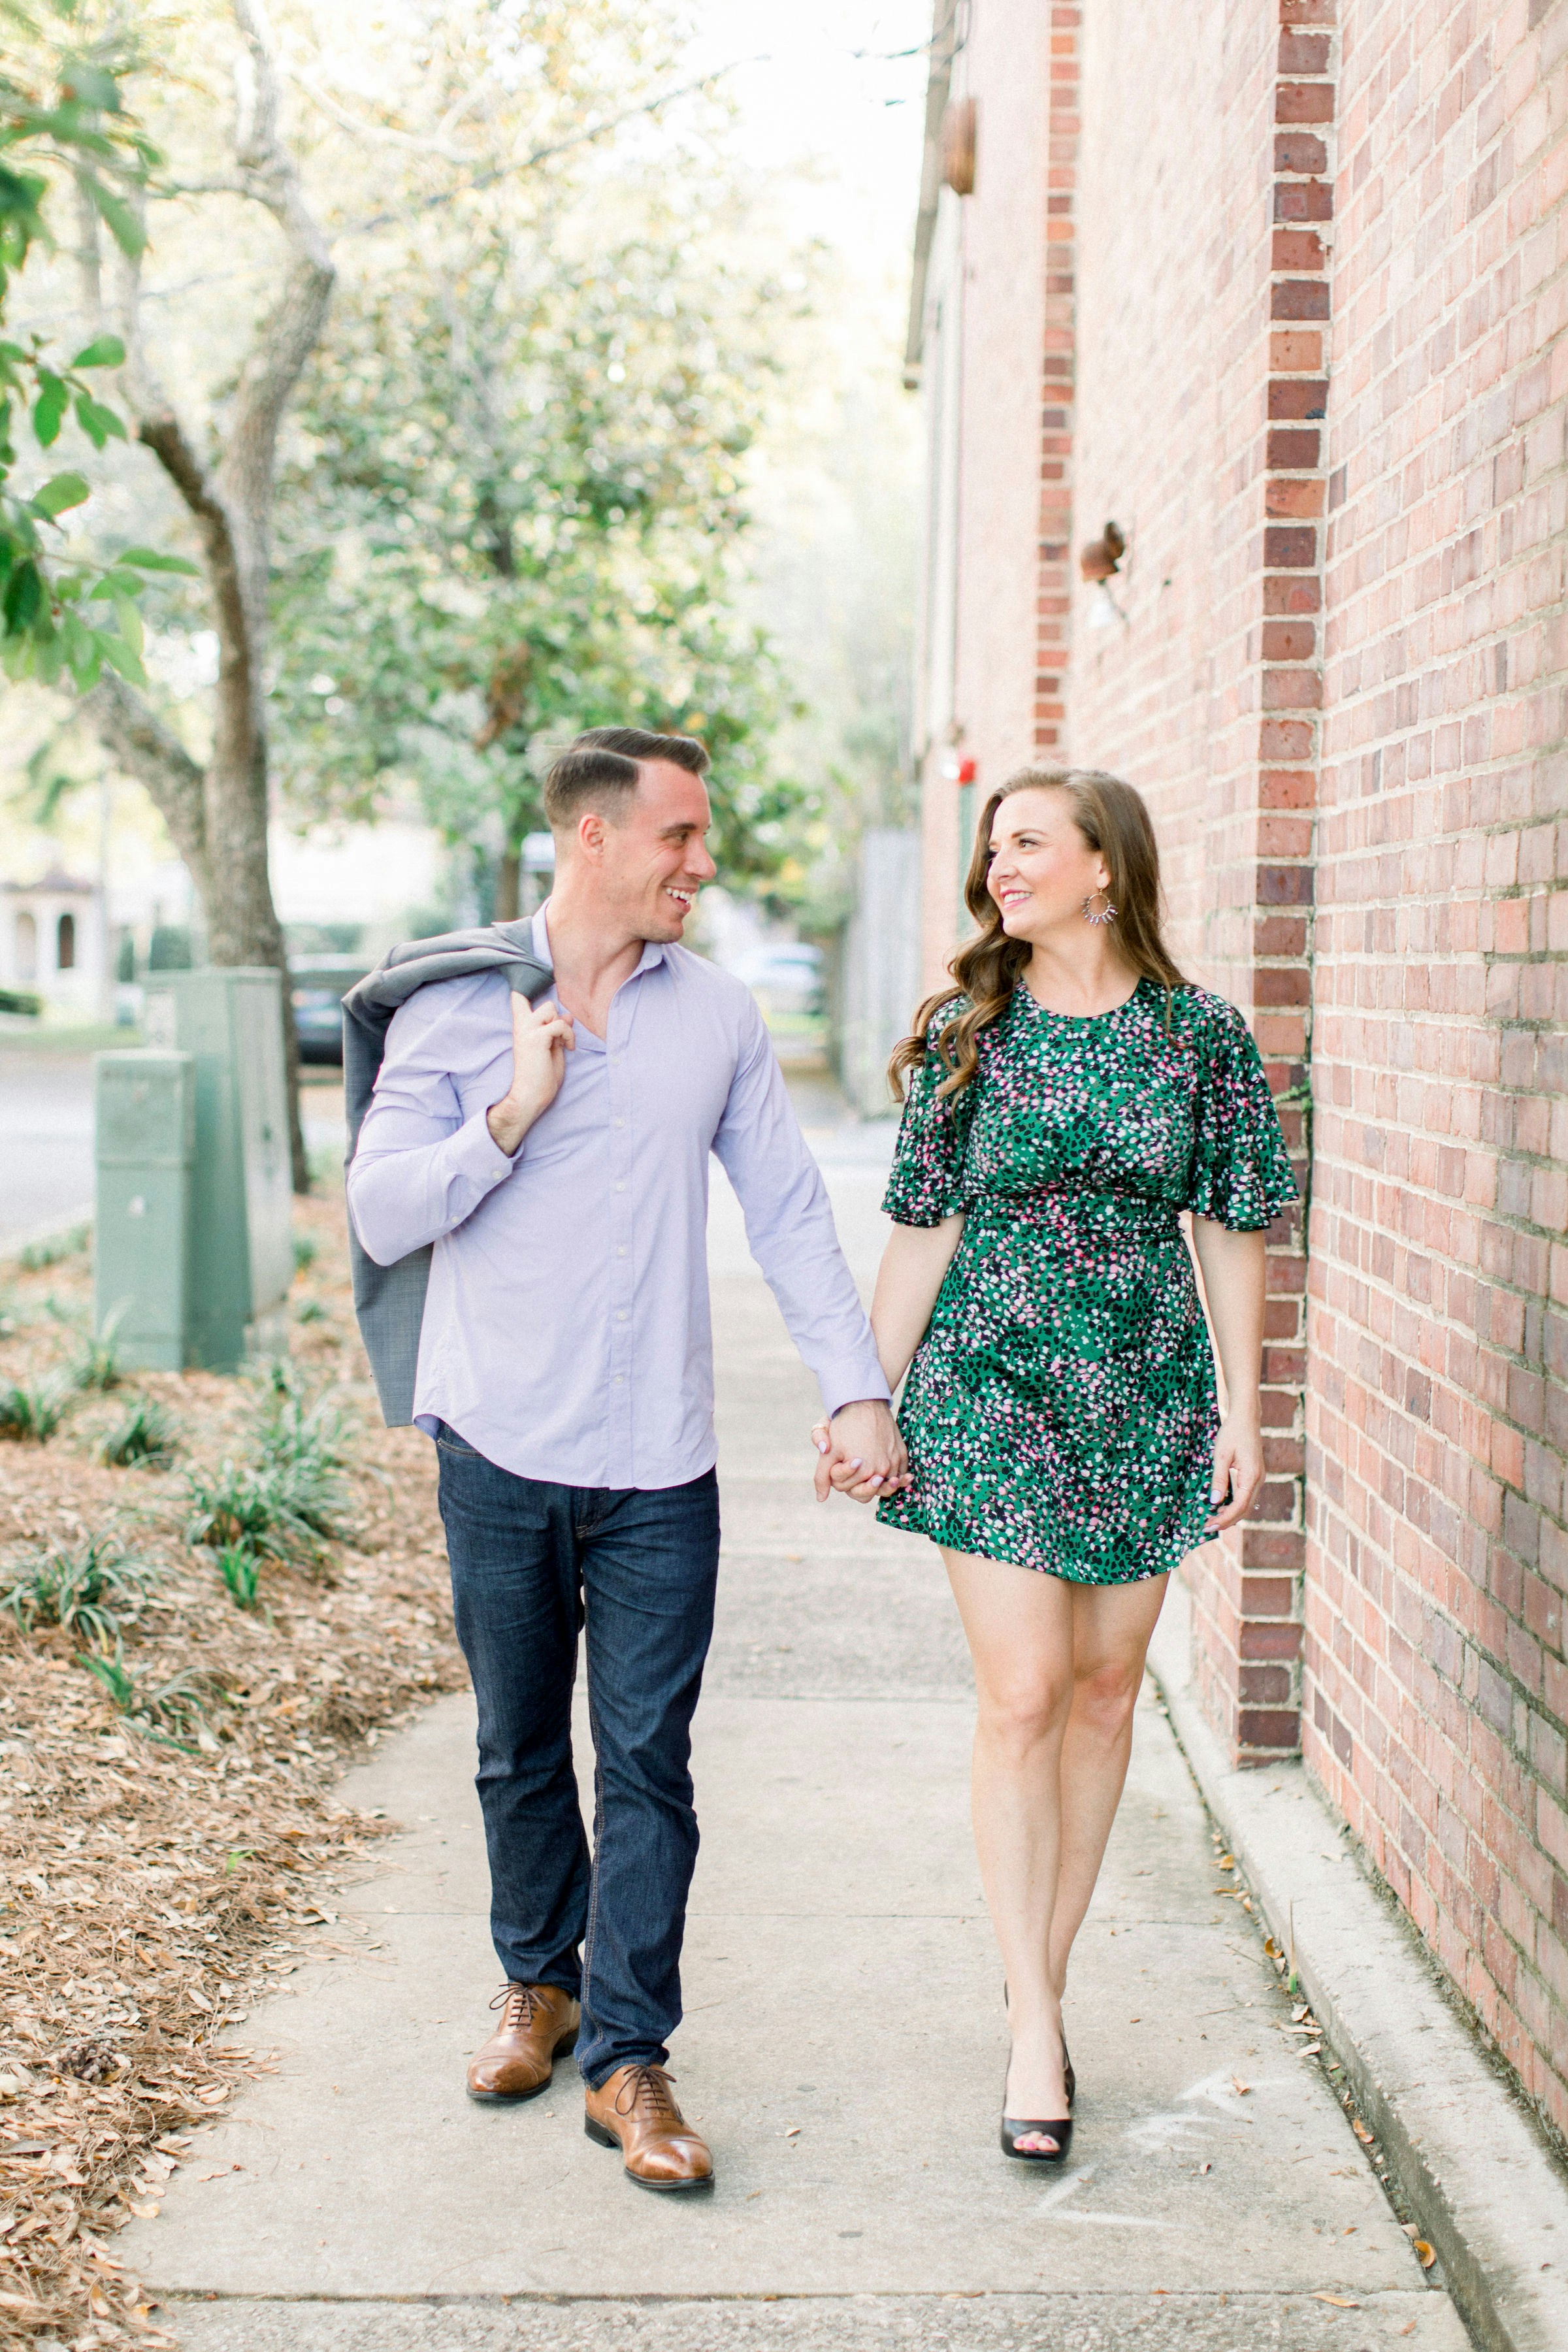 great photo recipe,how to photograph couple walking, couple smiling at each other, love, couple holding hands, learn more about the models, alex sanfilippo and alecia sanfilippo @ podpros.com; man and woman standing beside brick wall during daytime